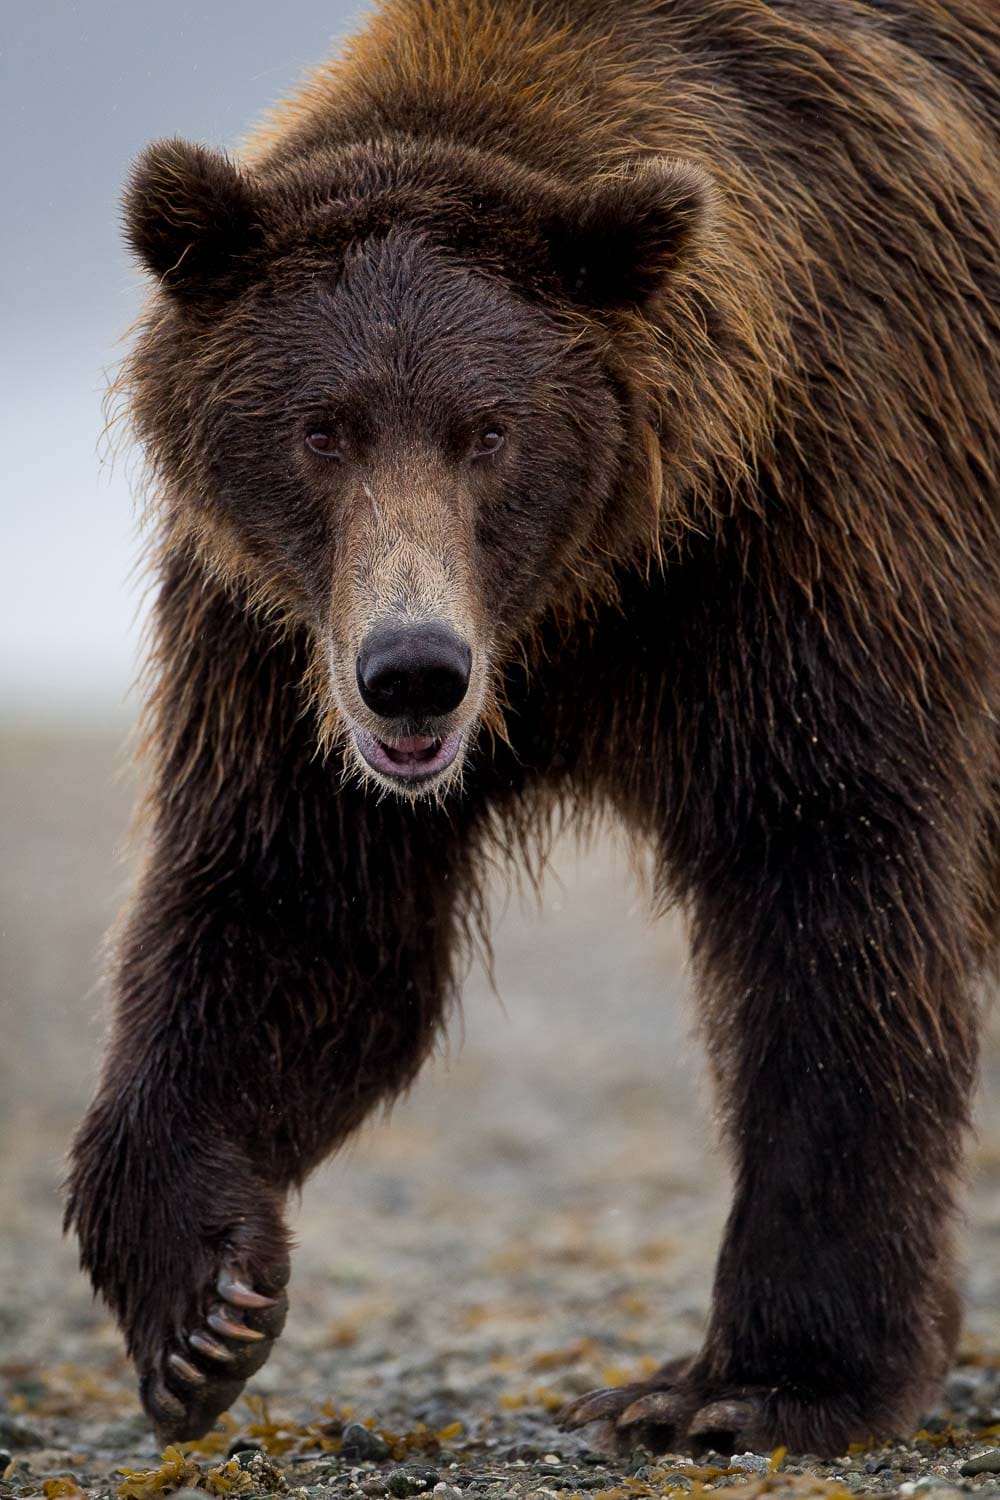 A brown bear walking toward the camera on a gravelly surface.